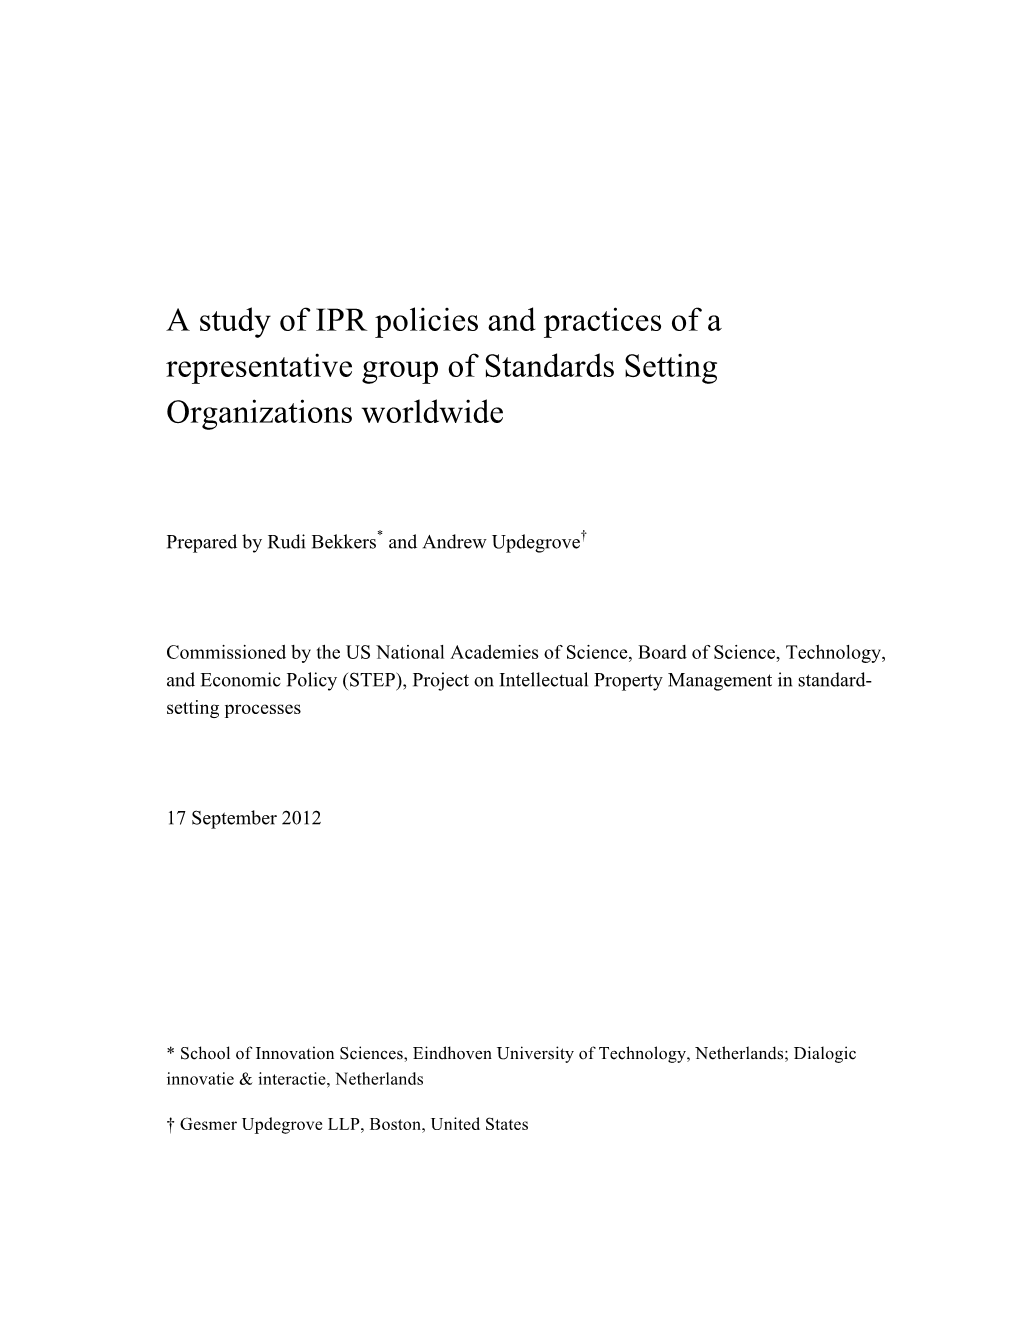 A Study of IPR Policies and Practices of a Representative Group of Standards Setting Organizations Worldwide